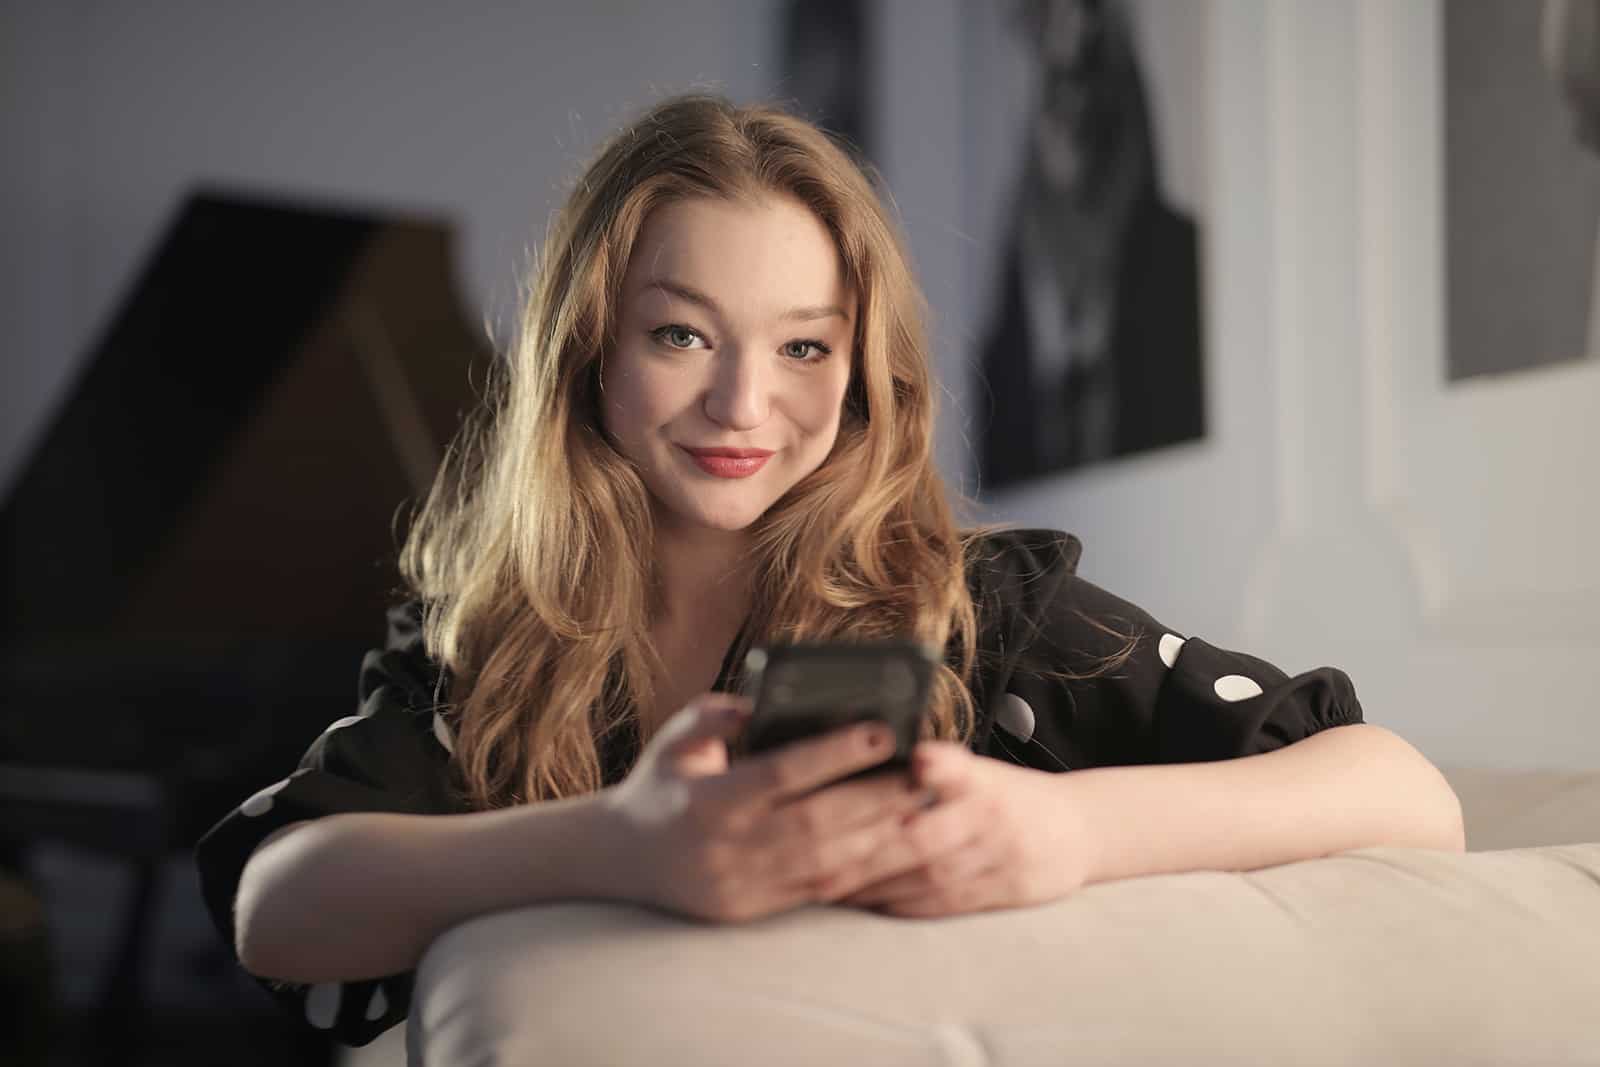 smiling woman holding smartphone while sitting on the couch